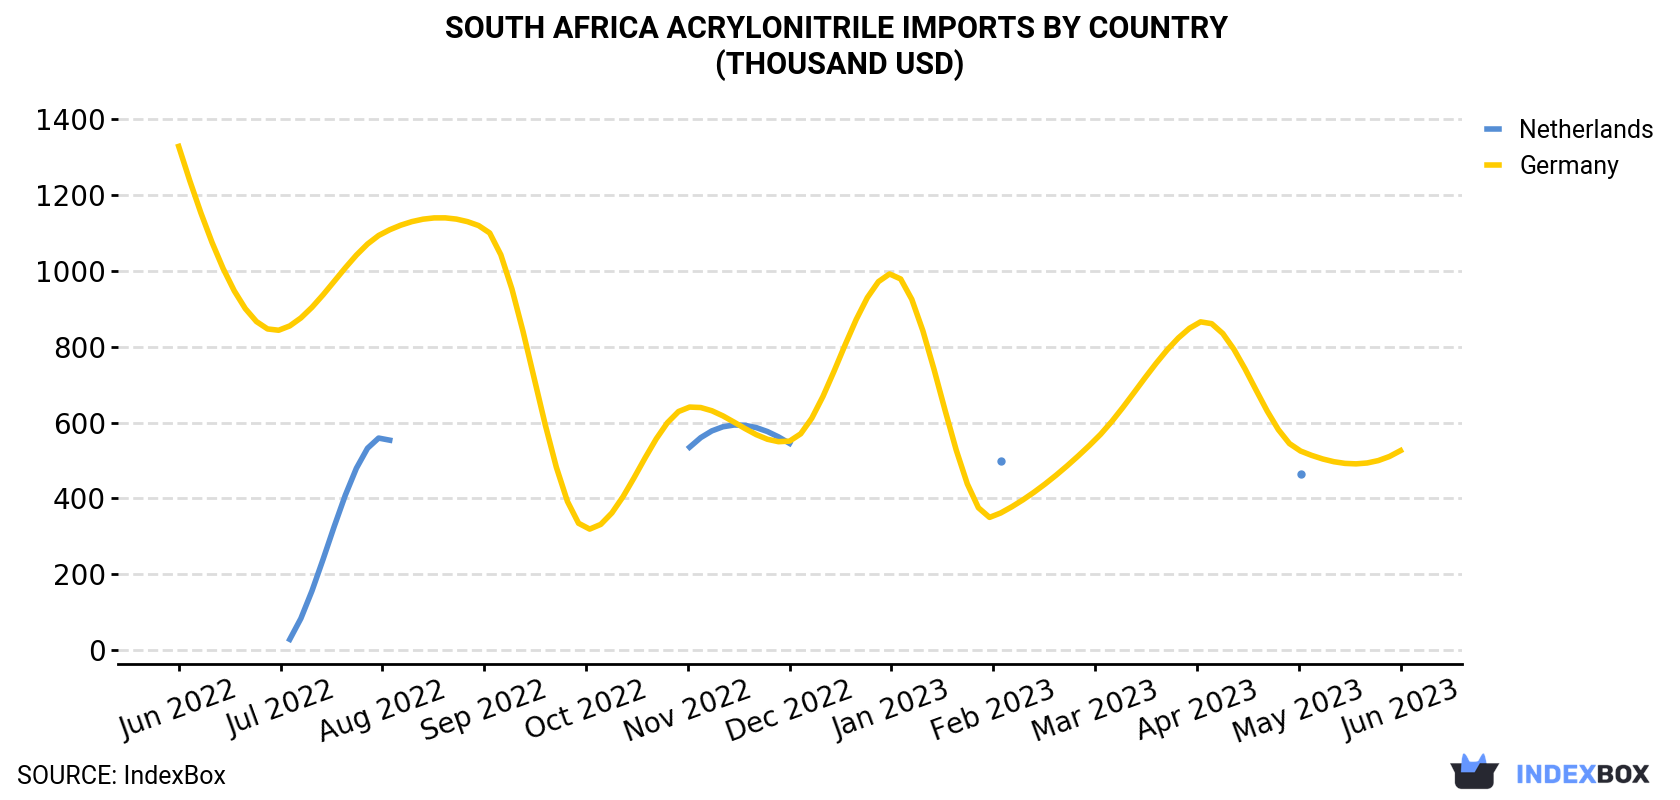 South Africa Acrylonitrile Imports By Country (Thousand USD)